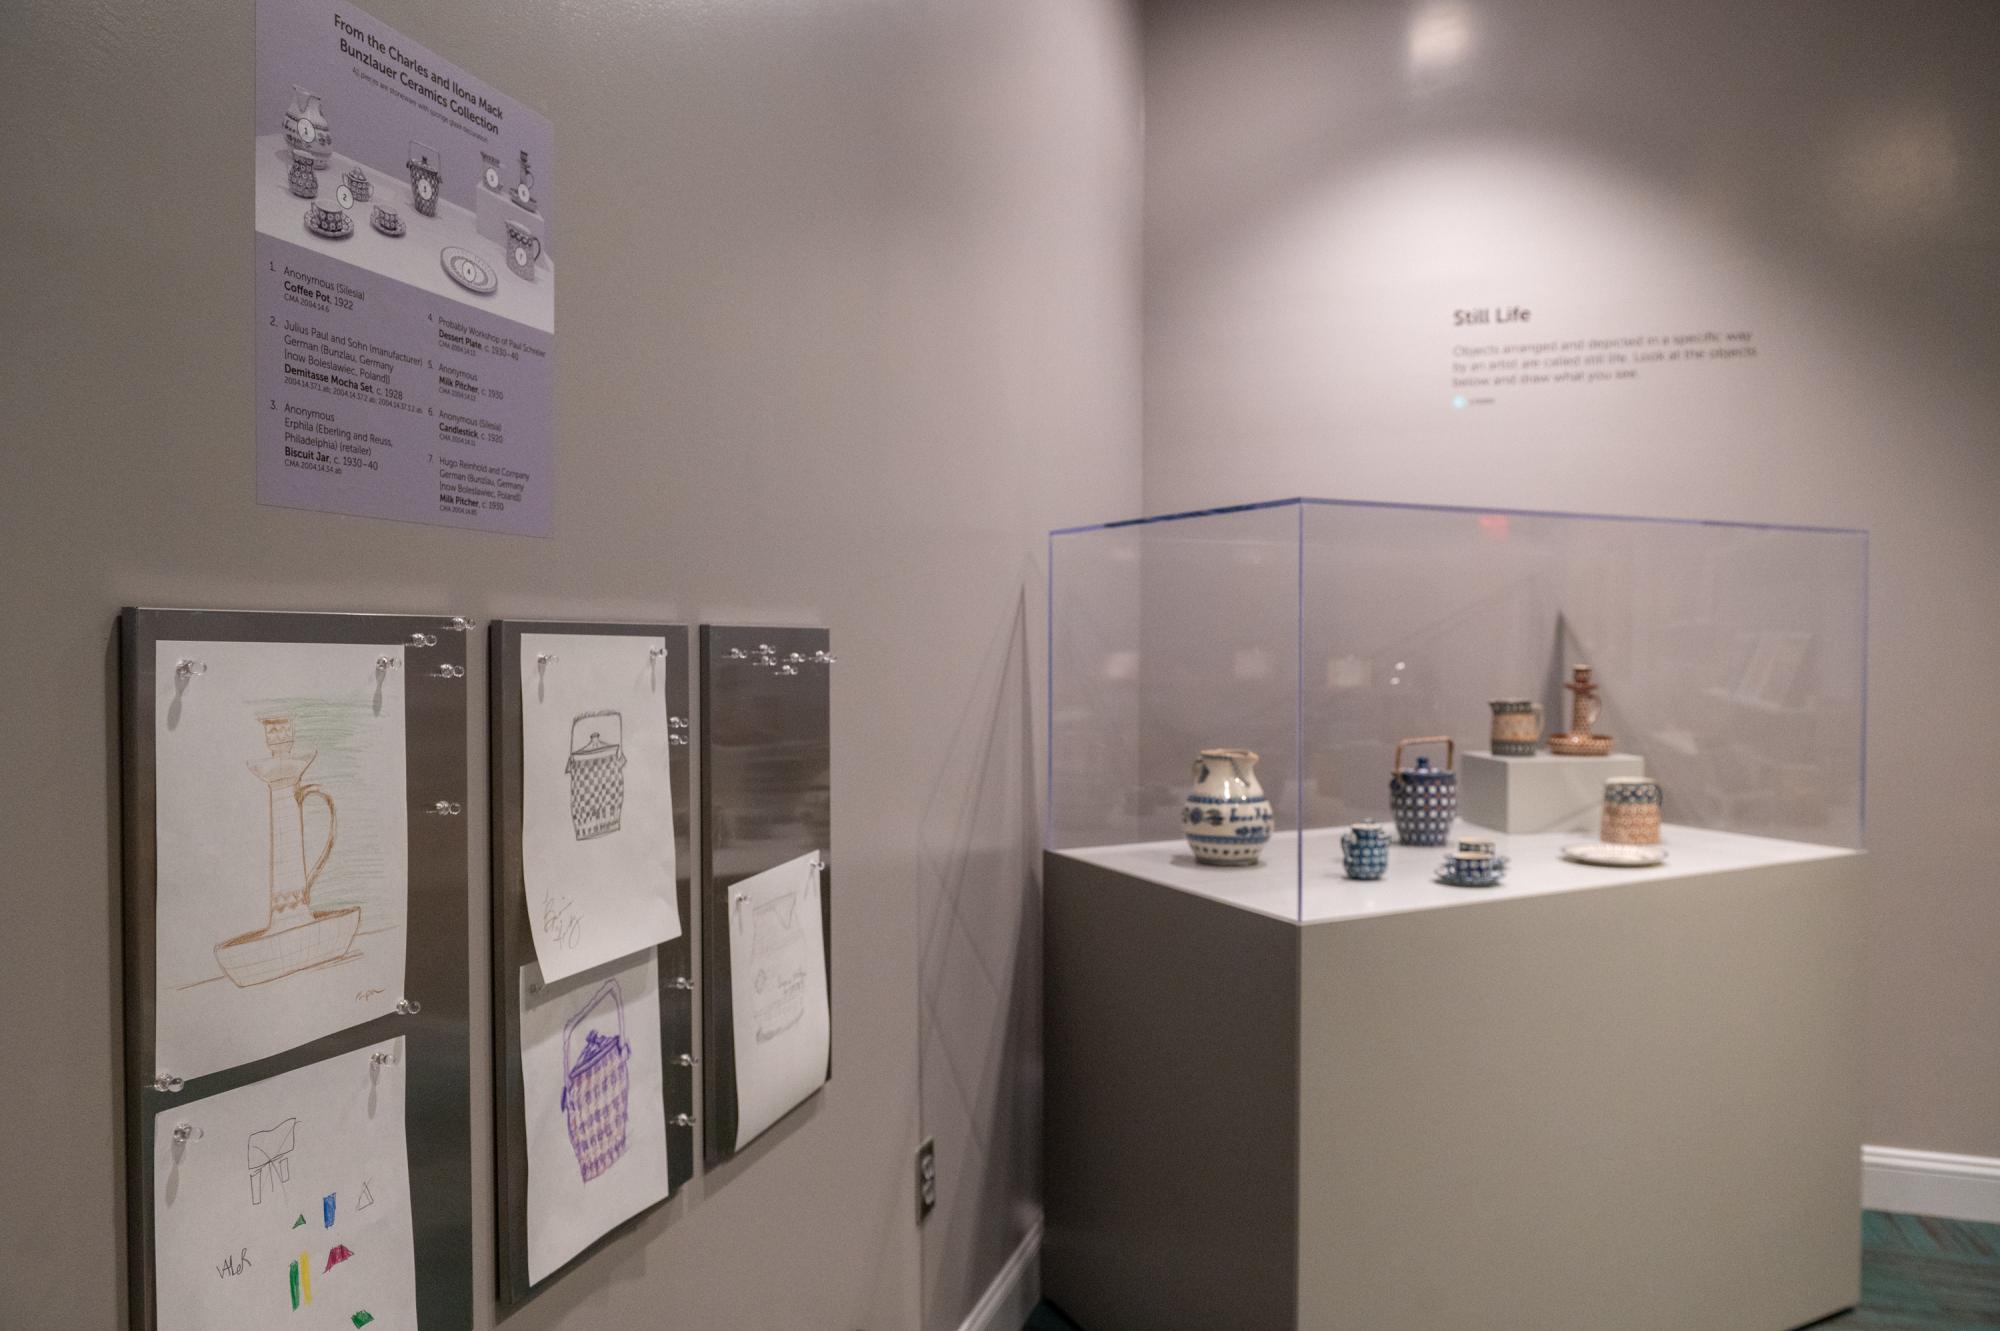 Bunzlauer pottery on view and drawings of the pieces